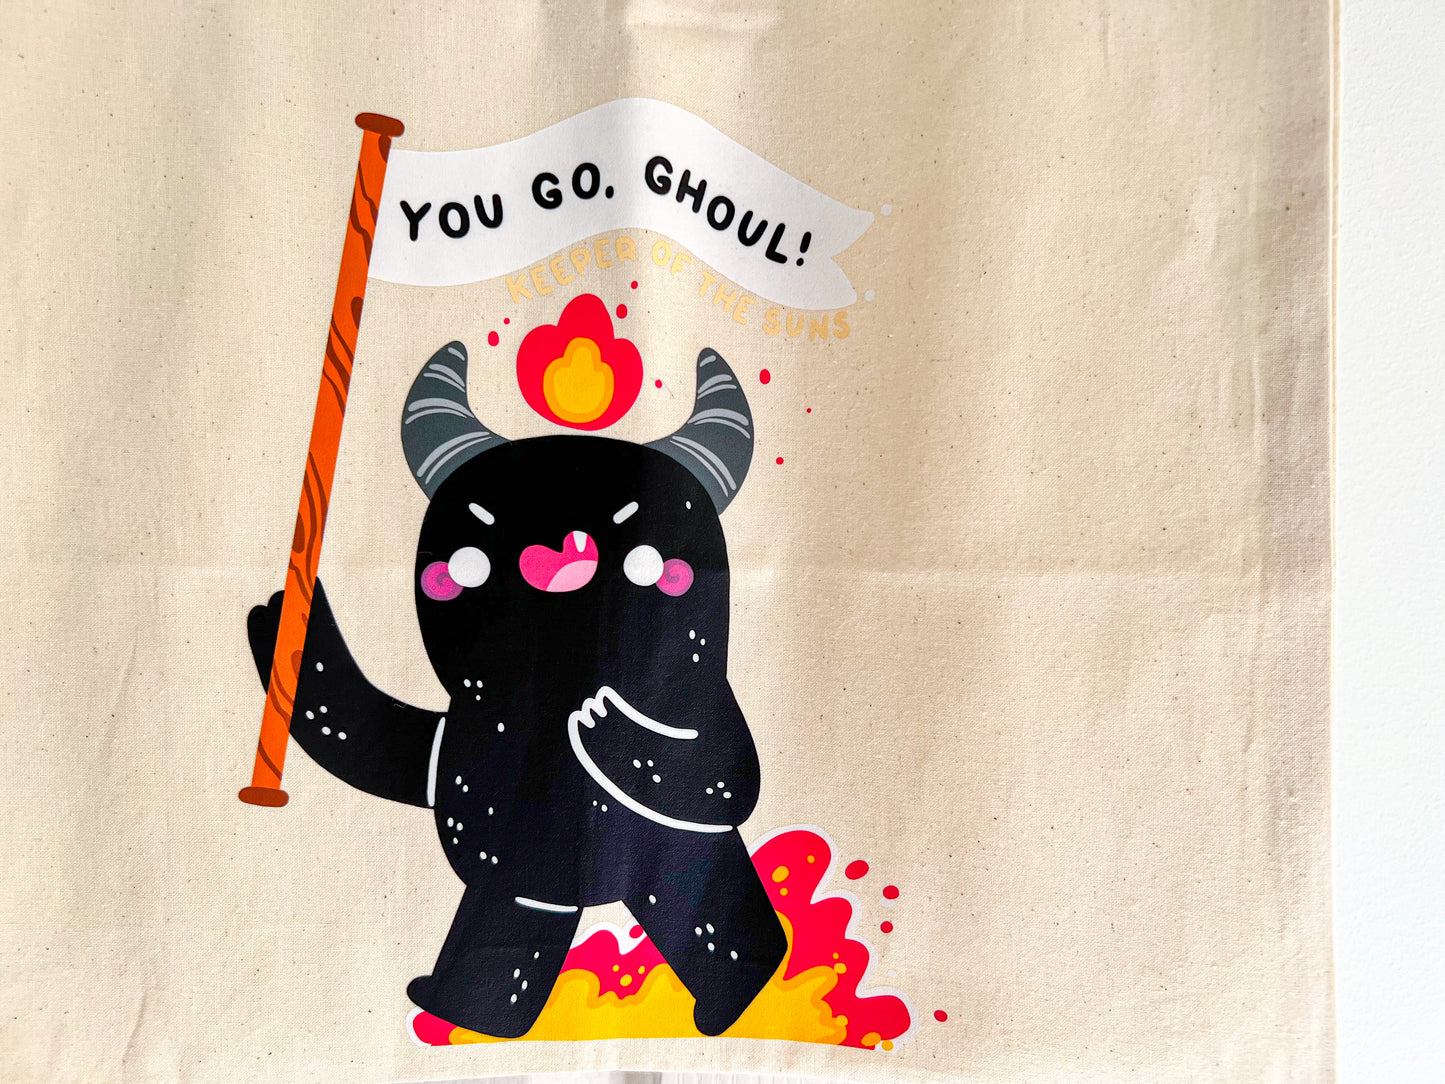 You Go Ghoul Tote | Printed Cotton Canvas